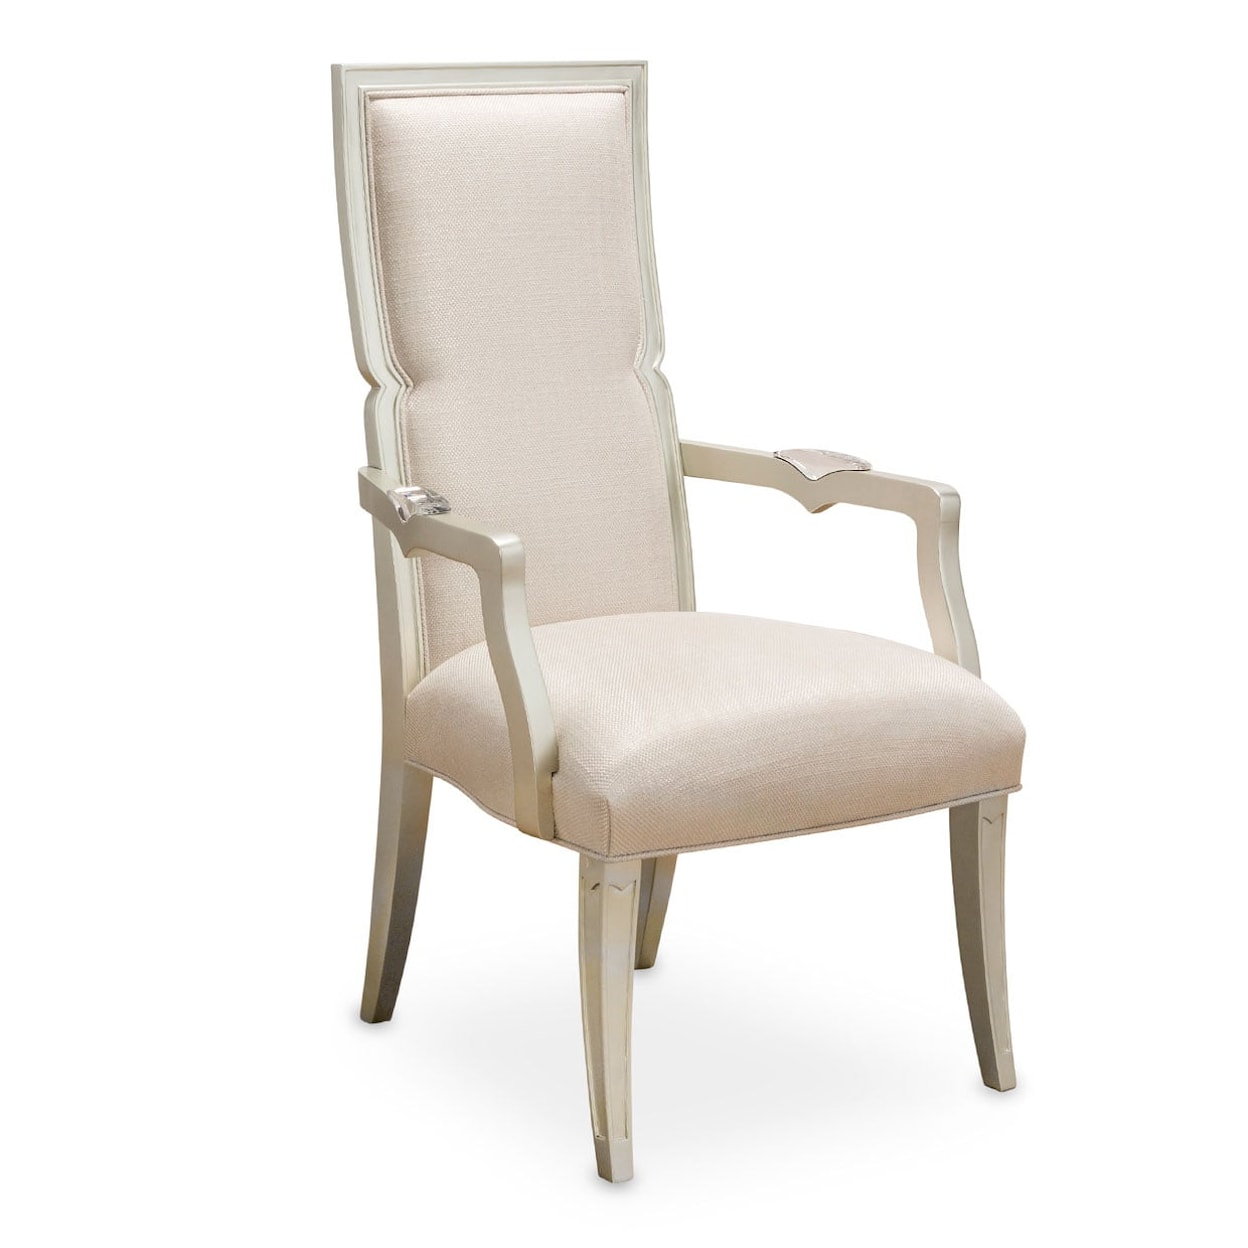 Michael Amini Camden Court Upholstered Arm Chair